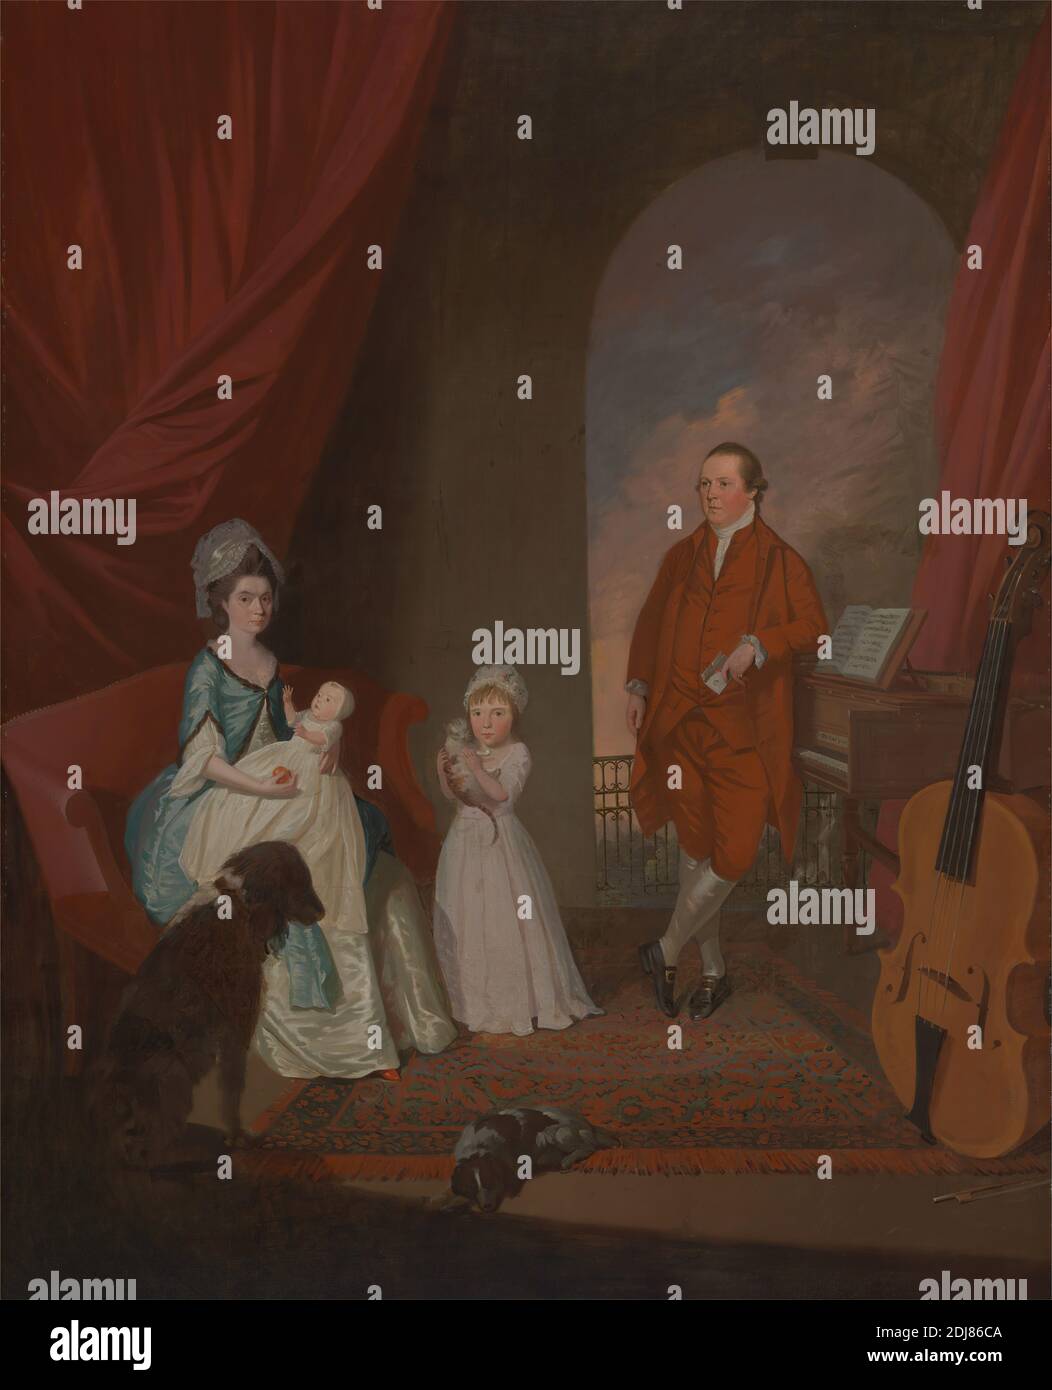 Family Group, James Millar, ca.1735–1805, British, between 1774 and 1780, Oil on canvas, Support (PTG): 50 × 40 1/2 inches (127 × 102.9 cm), arch, baby, balcony, breeches, buckles, cat (domestic cat), cello, children, coat, conversation piece, costume, couch, couple, curtains, daughter, dogs (animals), dresses, family, father, girl, gown, harpsichord, husband, keystone, letter, man, mother, music, musical instruments, parents, piano, pianoforte, portrait, red, rug, sheet music, shoes, silk, stockings, wife, window, woman Stock Photo